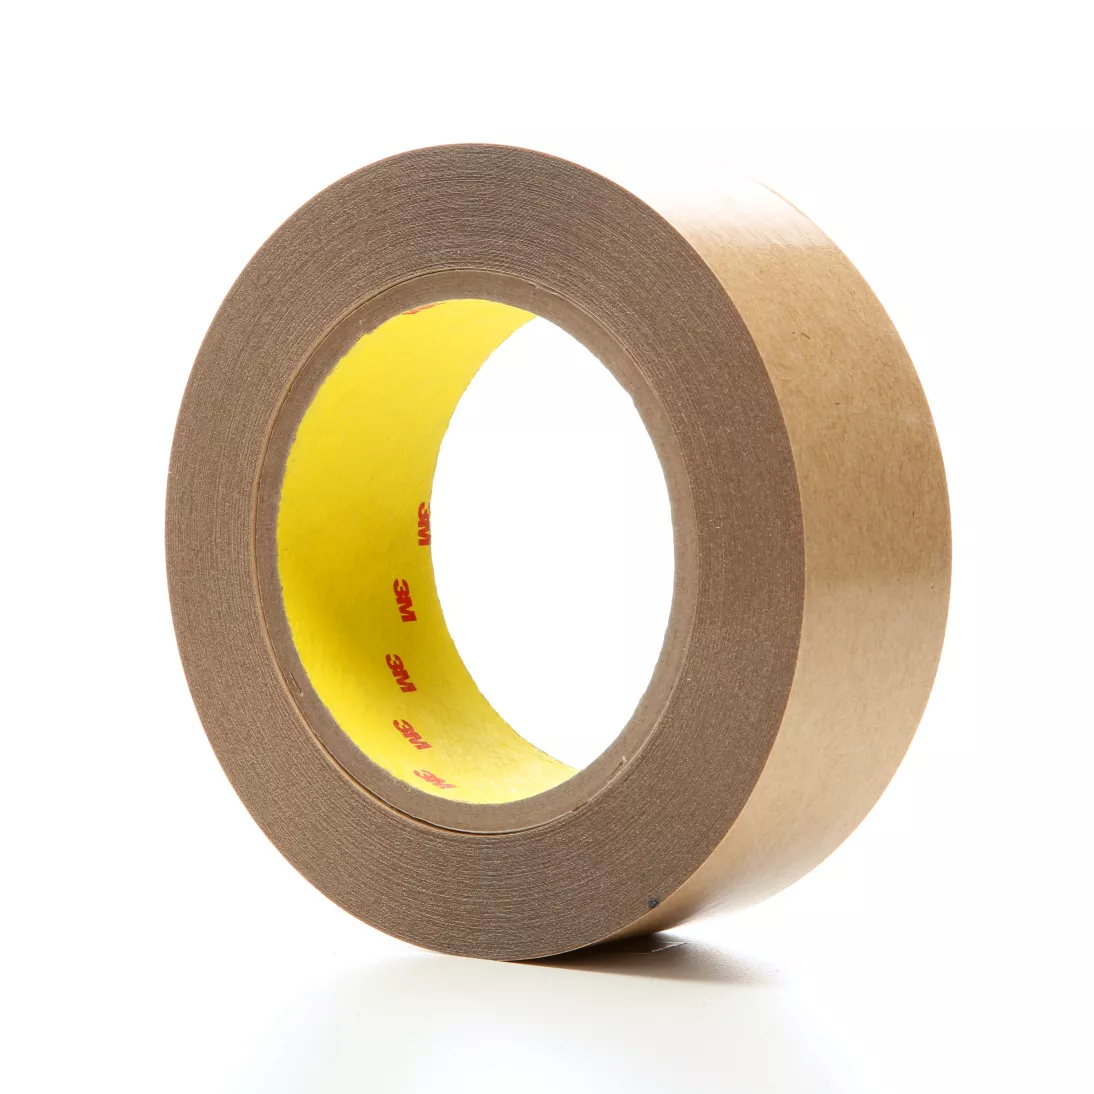 3M™ Double Coated Tape 415, Clear, 1 1/2 in x 36 yd, 4 mil, 24 rolls per
case